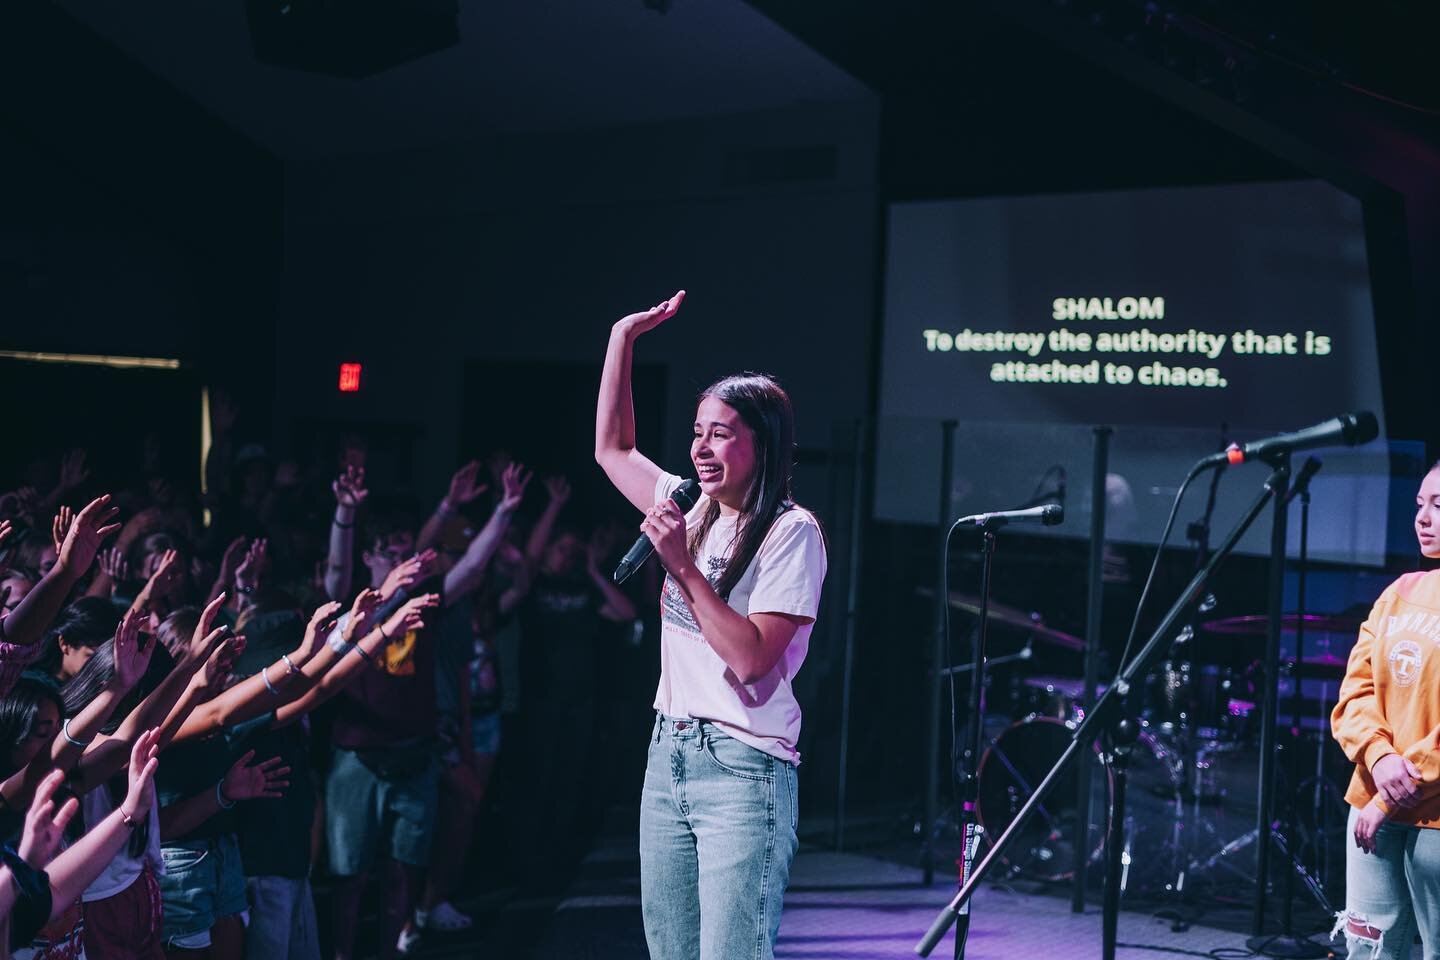 Happy Birthday to our Assistant Youth Director, @monicahortiales! Help us celebrate who she is to our network family. Her passion, courage, and love for Jesus inspires us all. Comment below how Monica has inspired you👇

*swipe for all the Monica vib